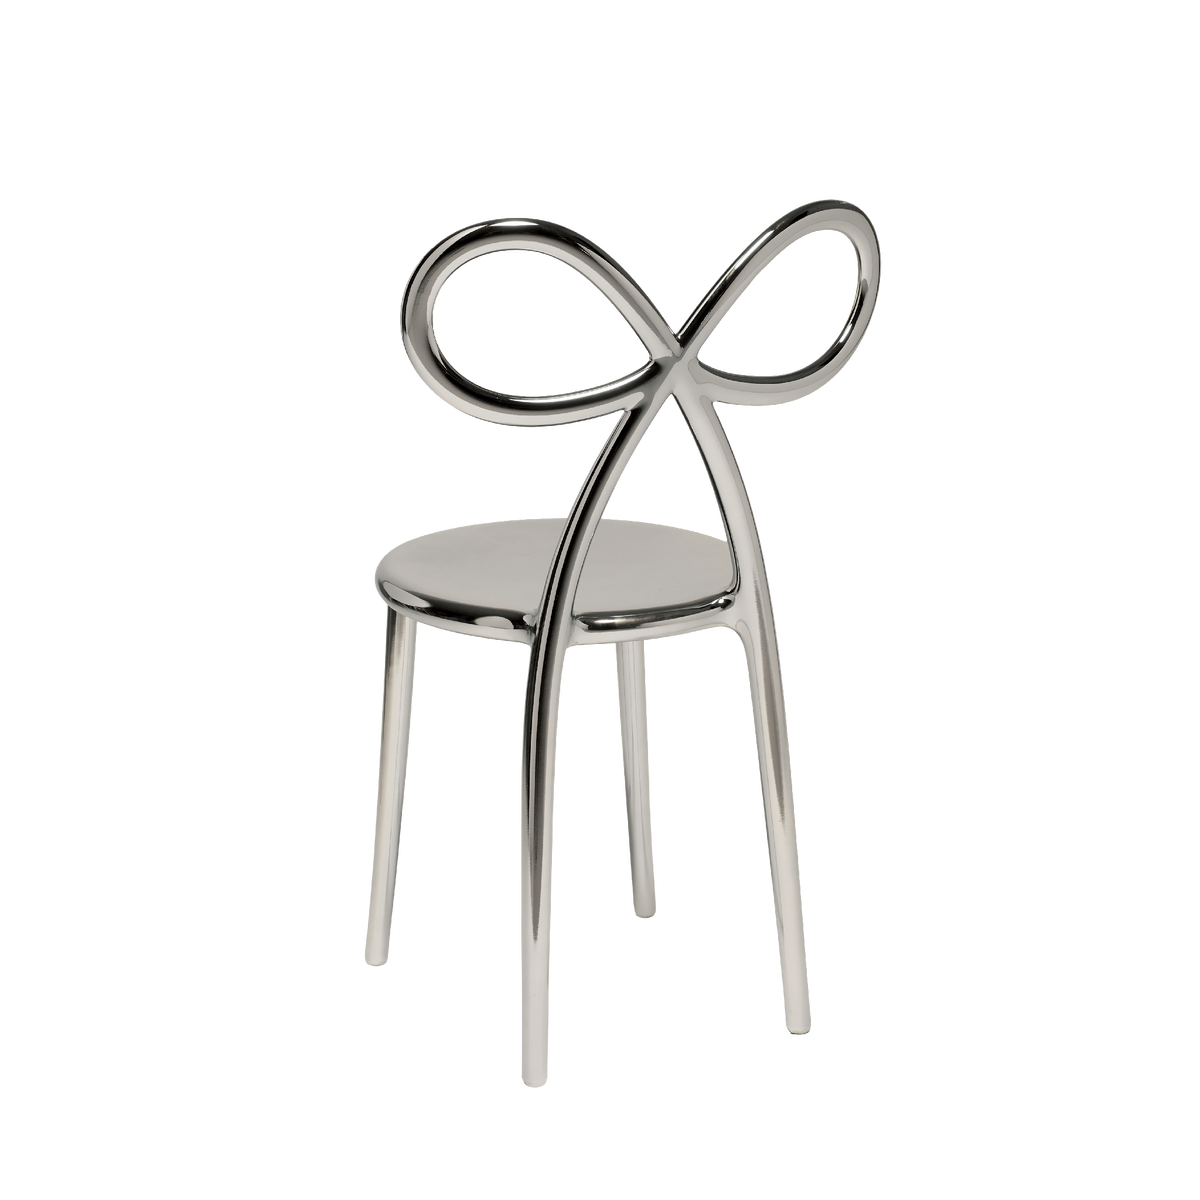 Ribbon chairs were designed by Nika Zupanc, which joined the group of outstanding designers directed by Stefano Gioannoni to create emotionally charging items that will be available to a wider audience. Originally, the Ribbon chair has been designed especially for the Dior brand in 2013 now returns in new color editions.